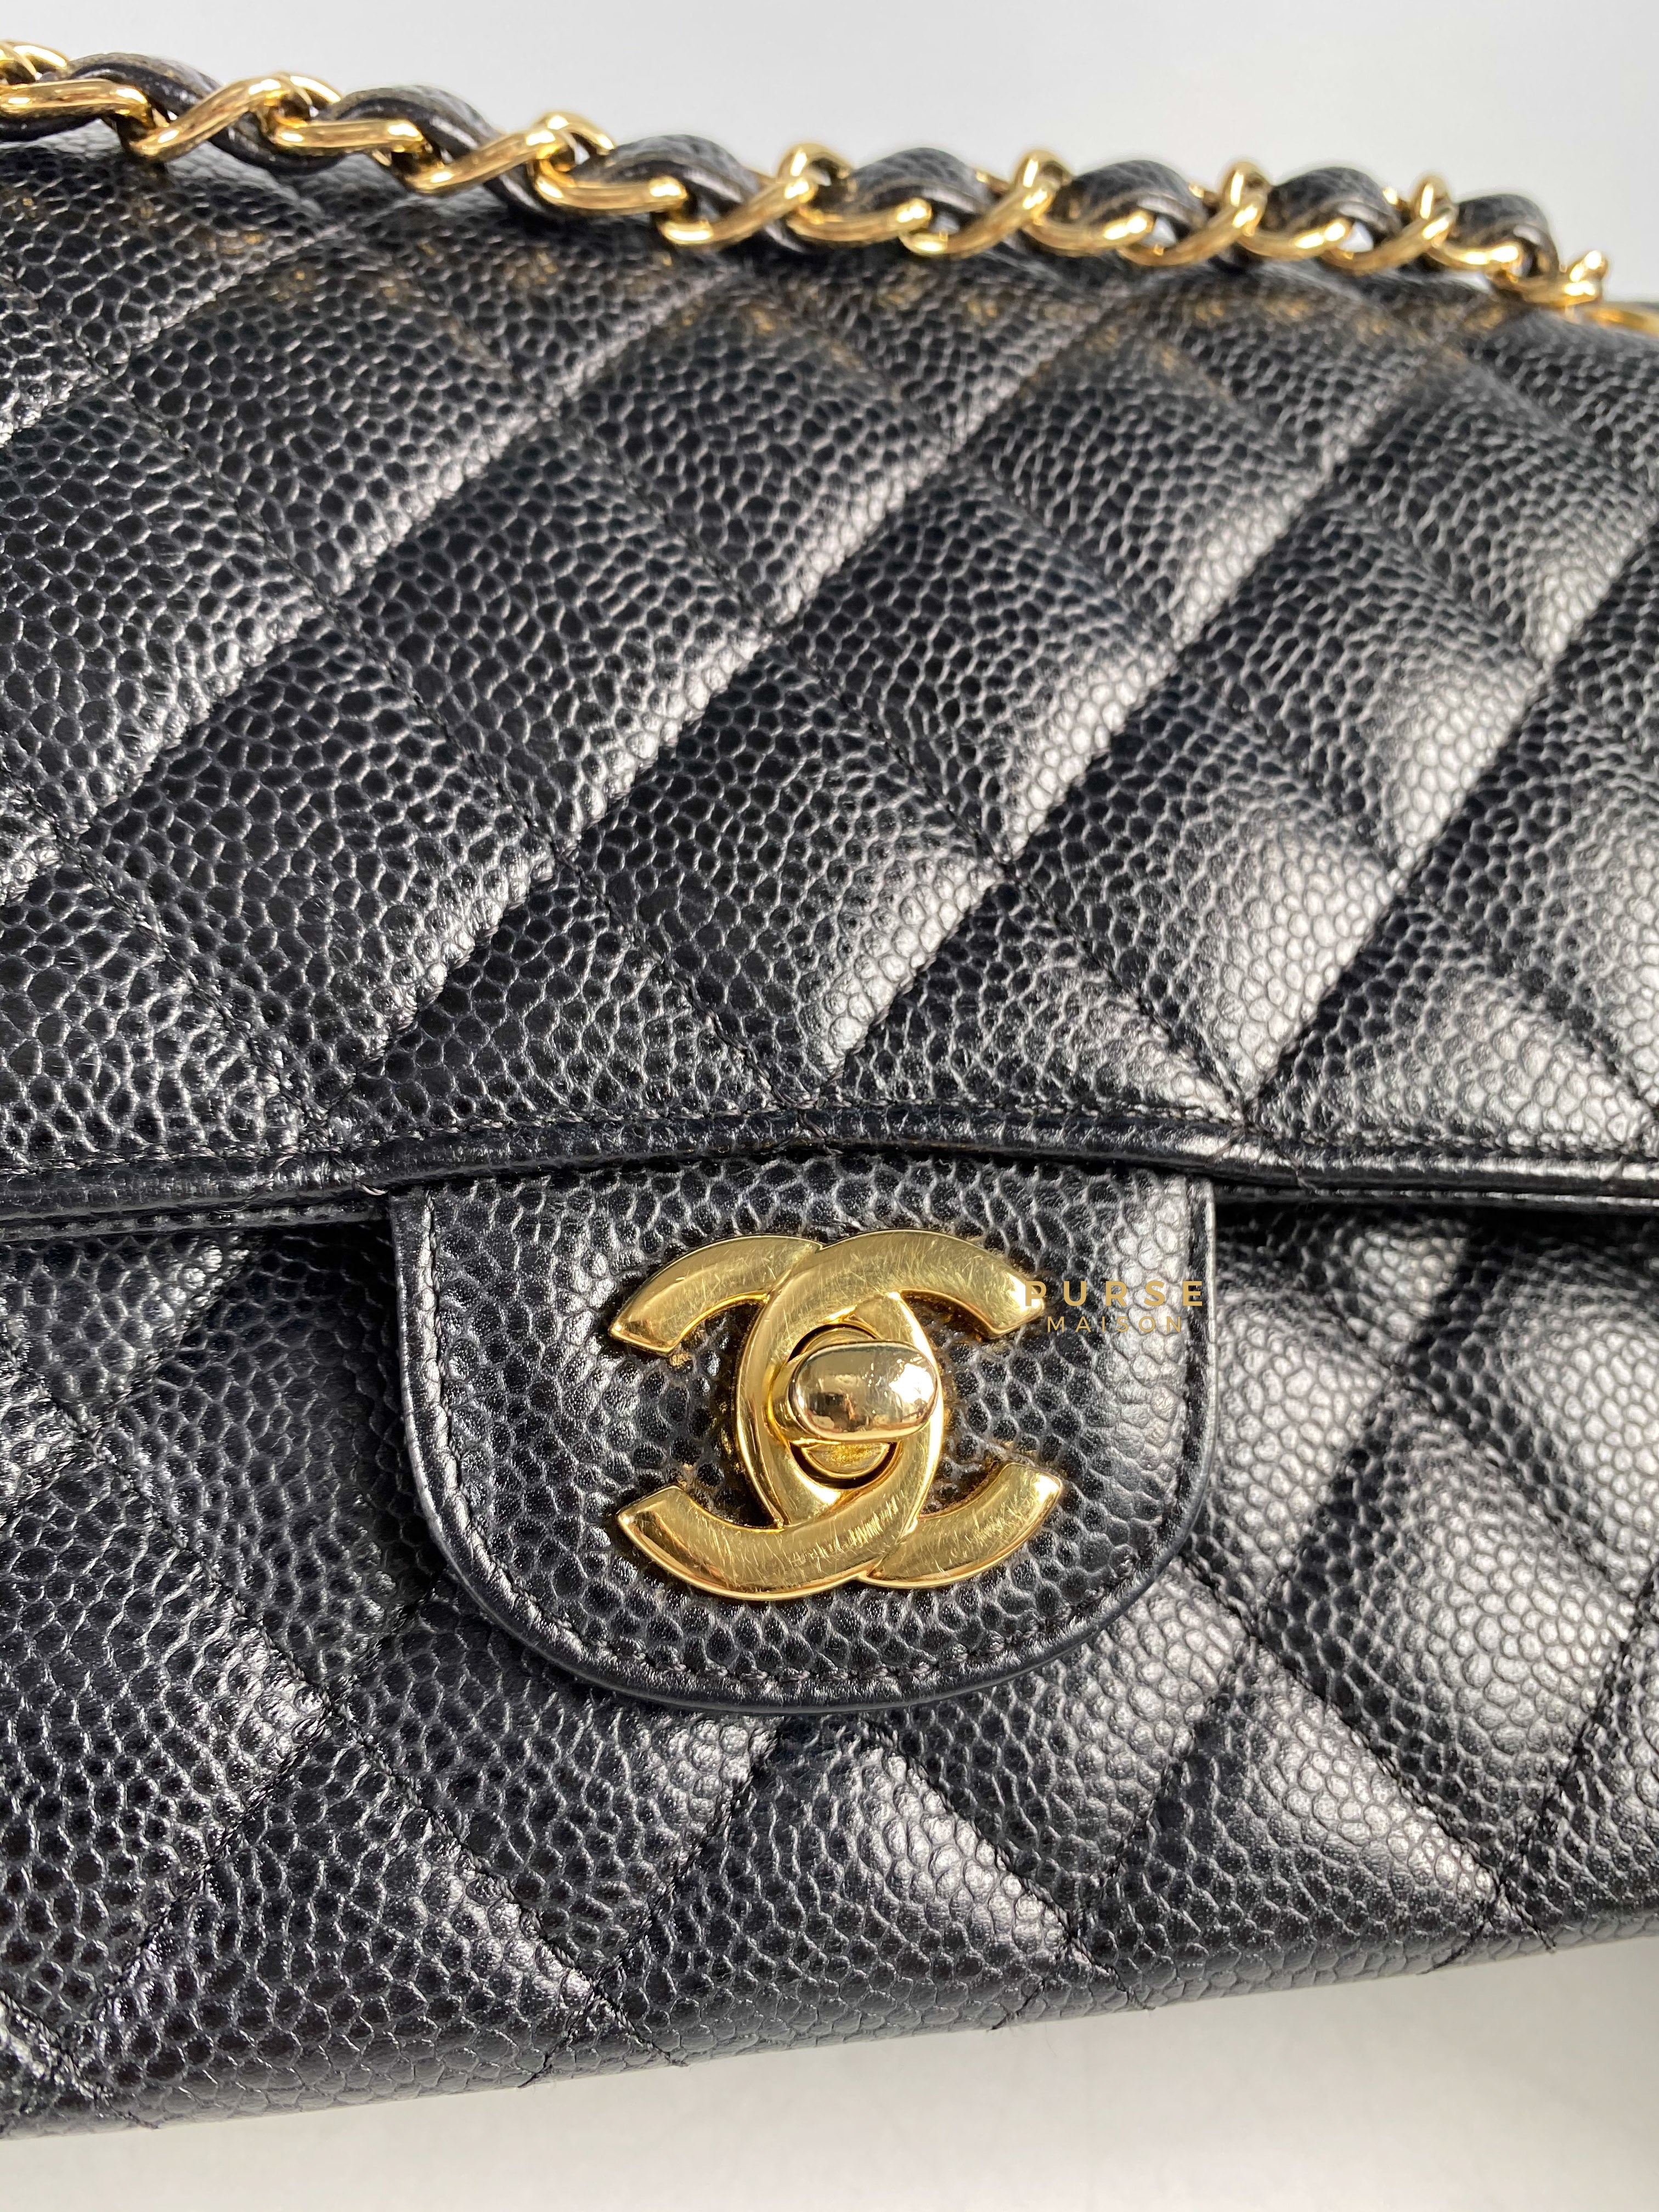 Chanel Classic Double Flap Medium Black Caviar Leather and Gold Hardware Series 20 | Purse Maison Luxury Bags Shop